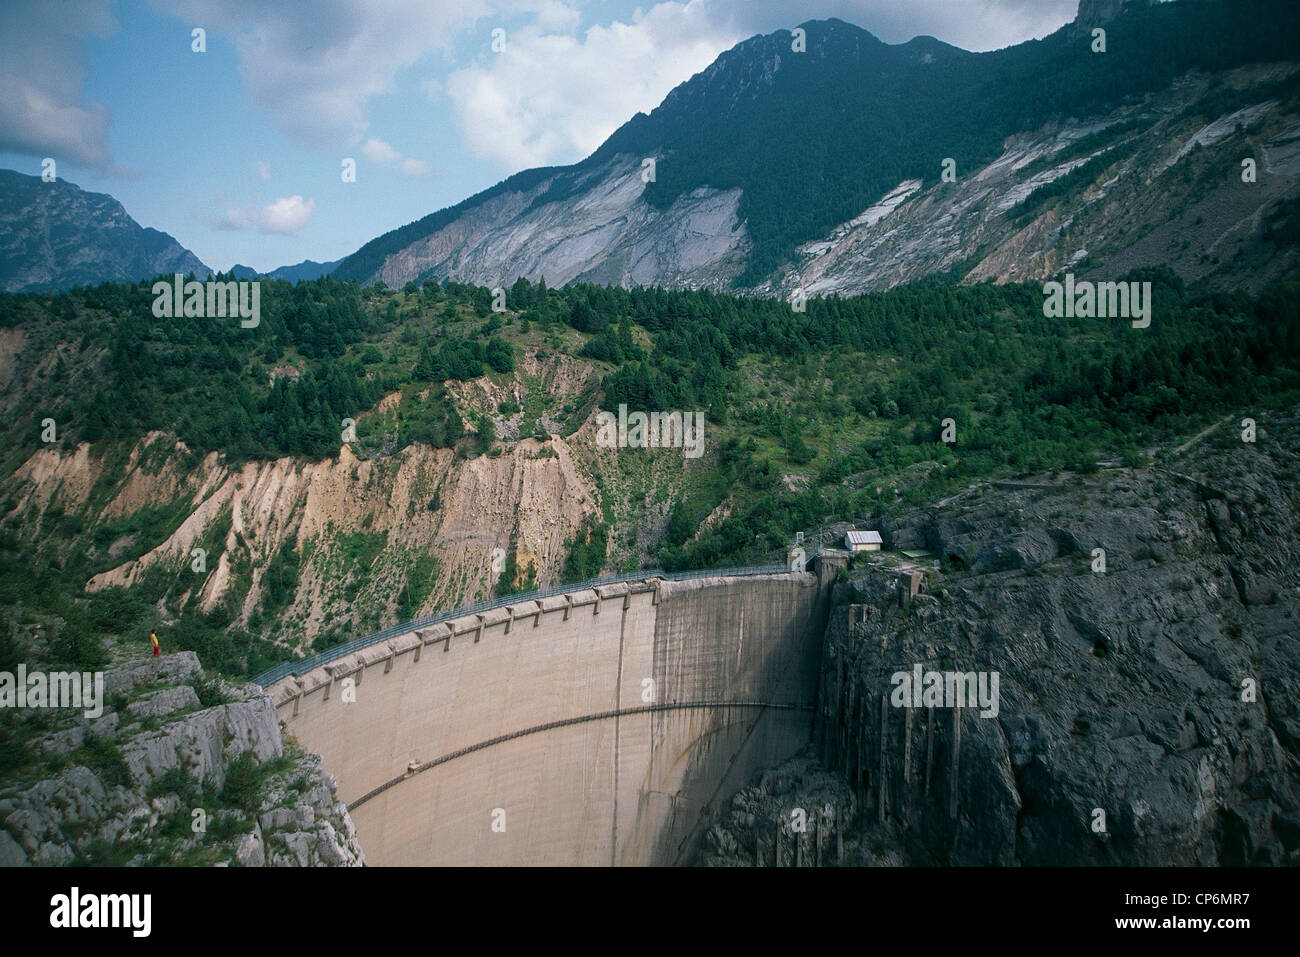 Friuli Regional Natural Park of Dolomites of Friuli (PN) dam of Vajont Mount Mount Toc Toc, which collapsed inside dam itself Stock Photo